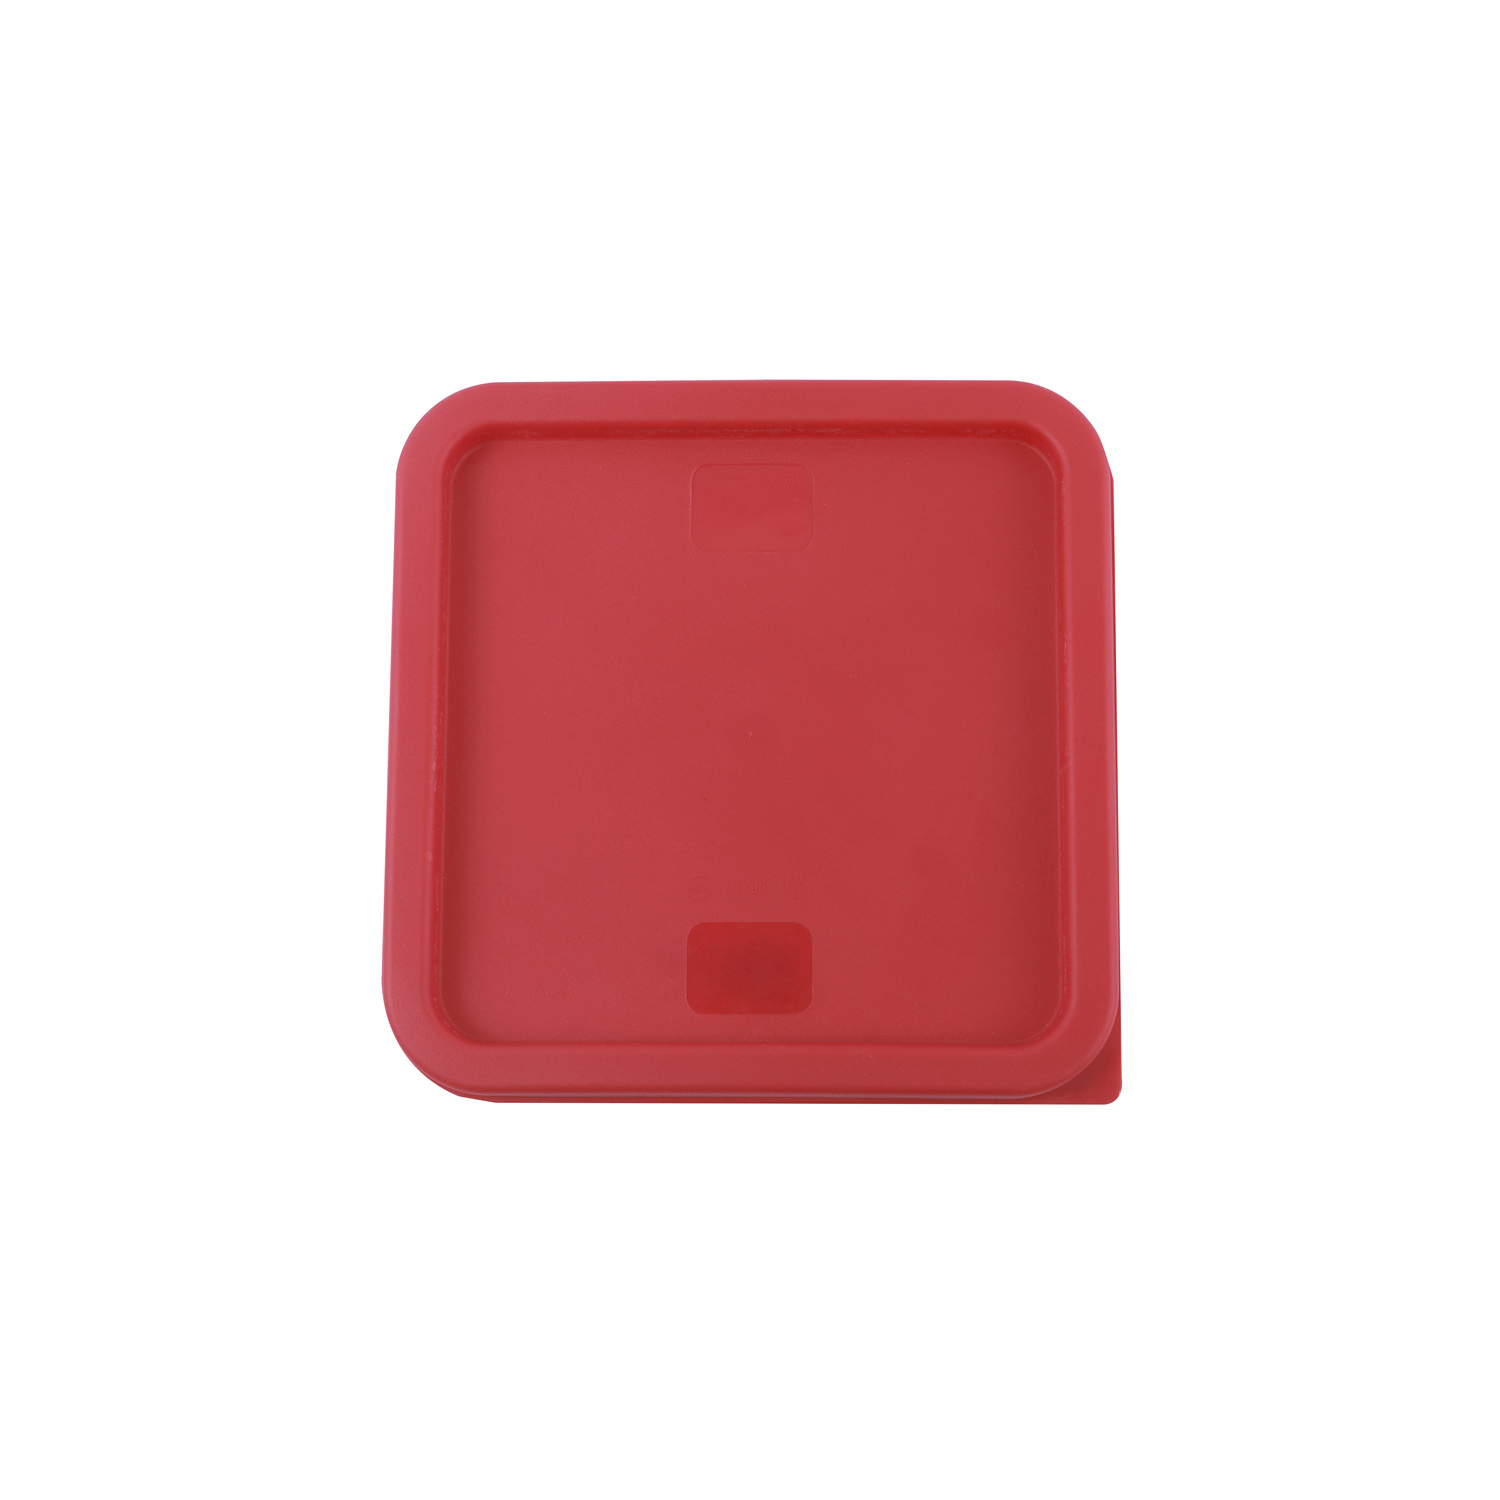 CAC China FSSQ-68CV-R Red Square Food Storage Container Cover for 6 Qt. & 8 Qt.